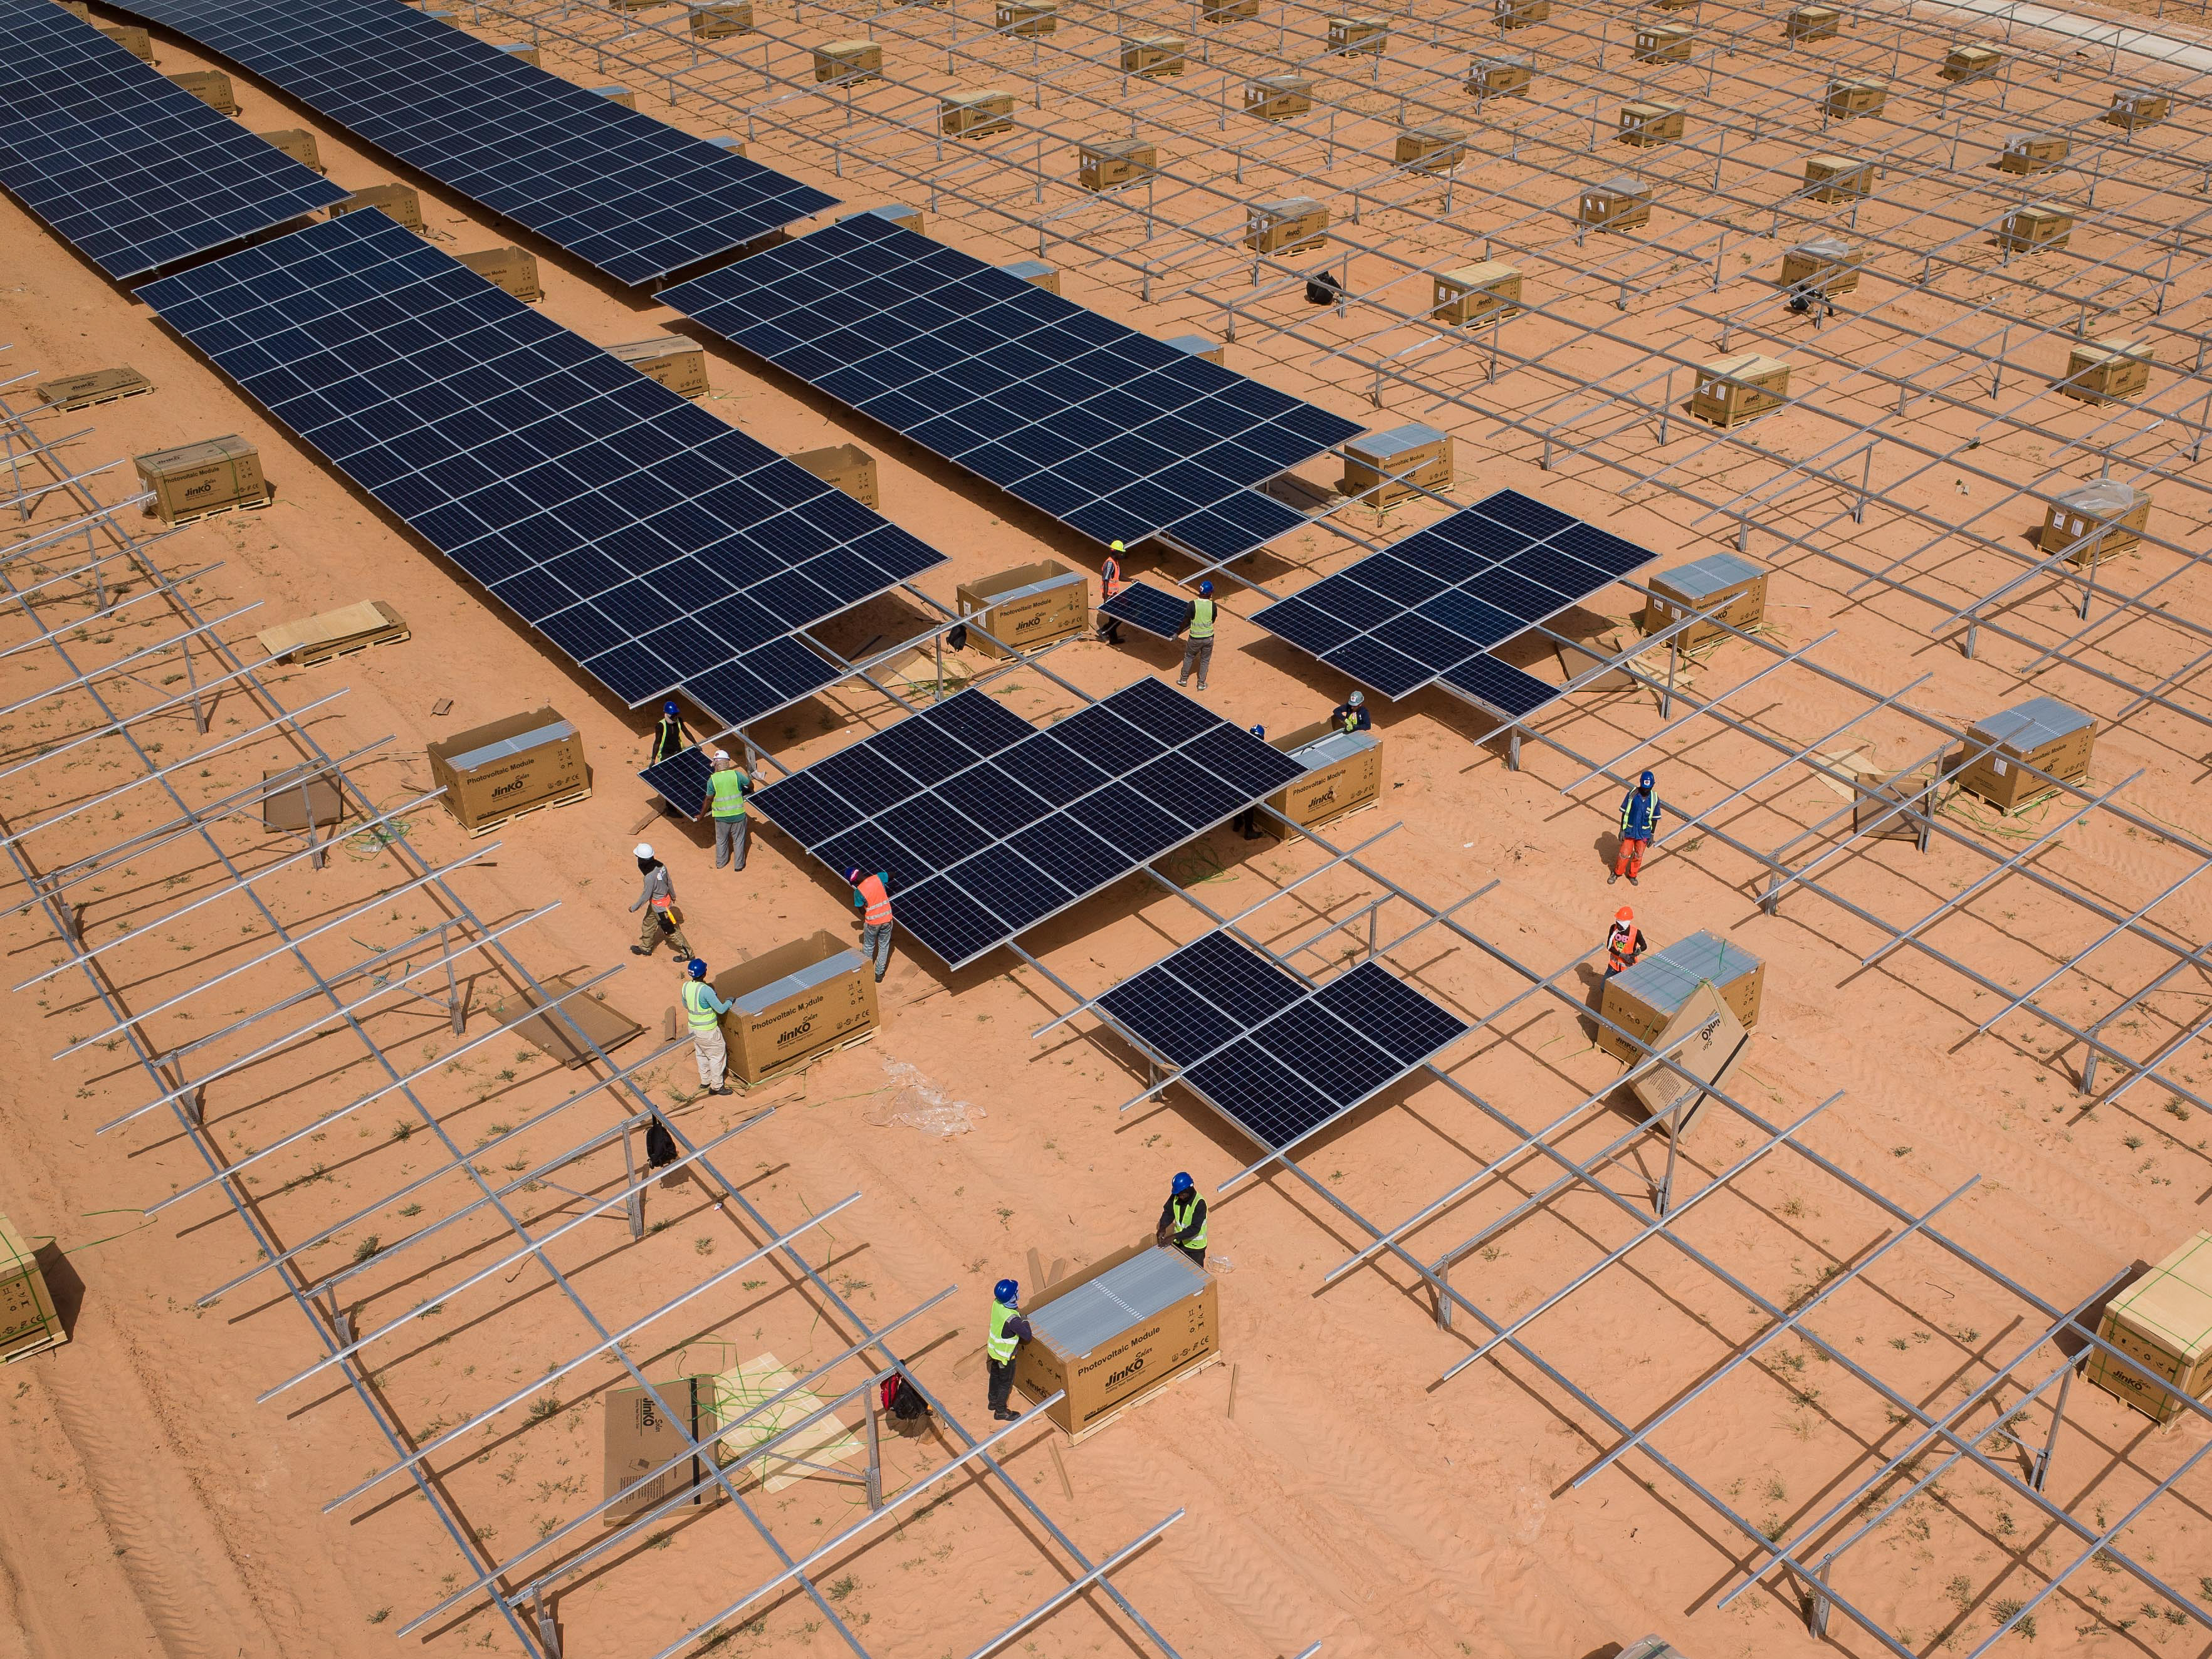 Construction of the solar plant